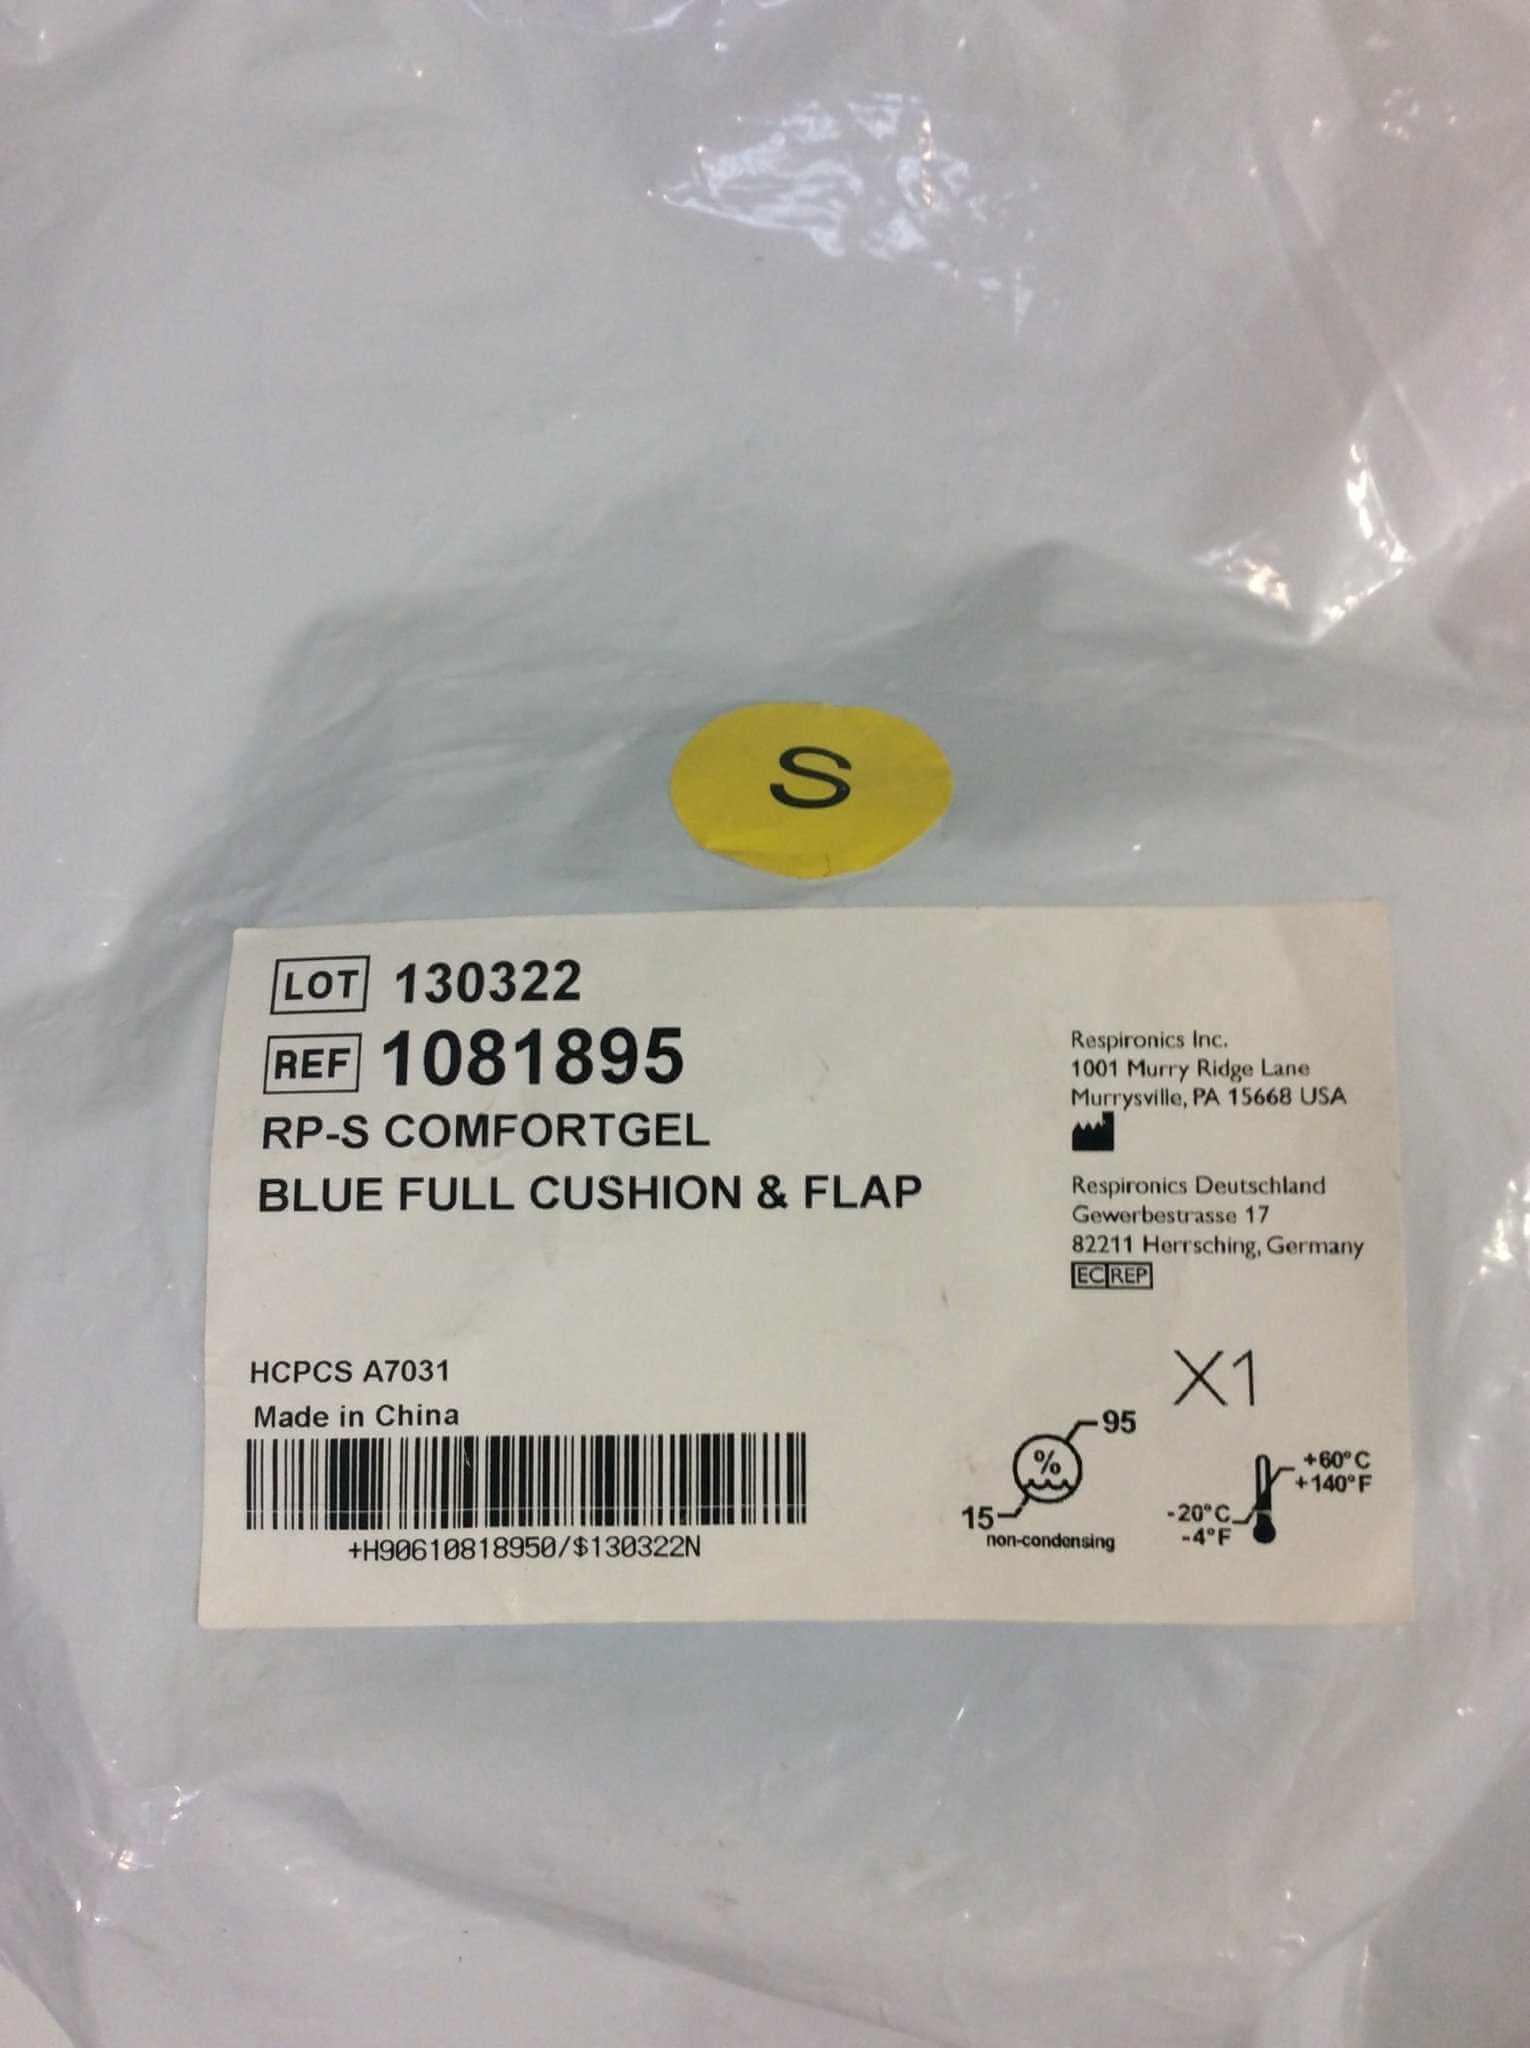 NEW Philips Respironics Small ComfortGel Blue Full Cushion & Flap 1081895 FREE Shipping - MBR Medicals